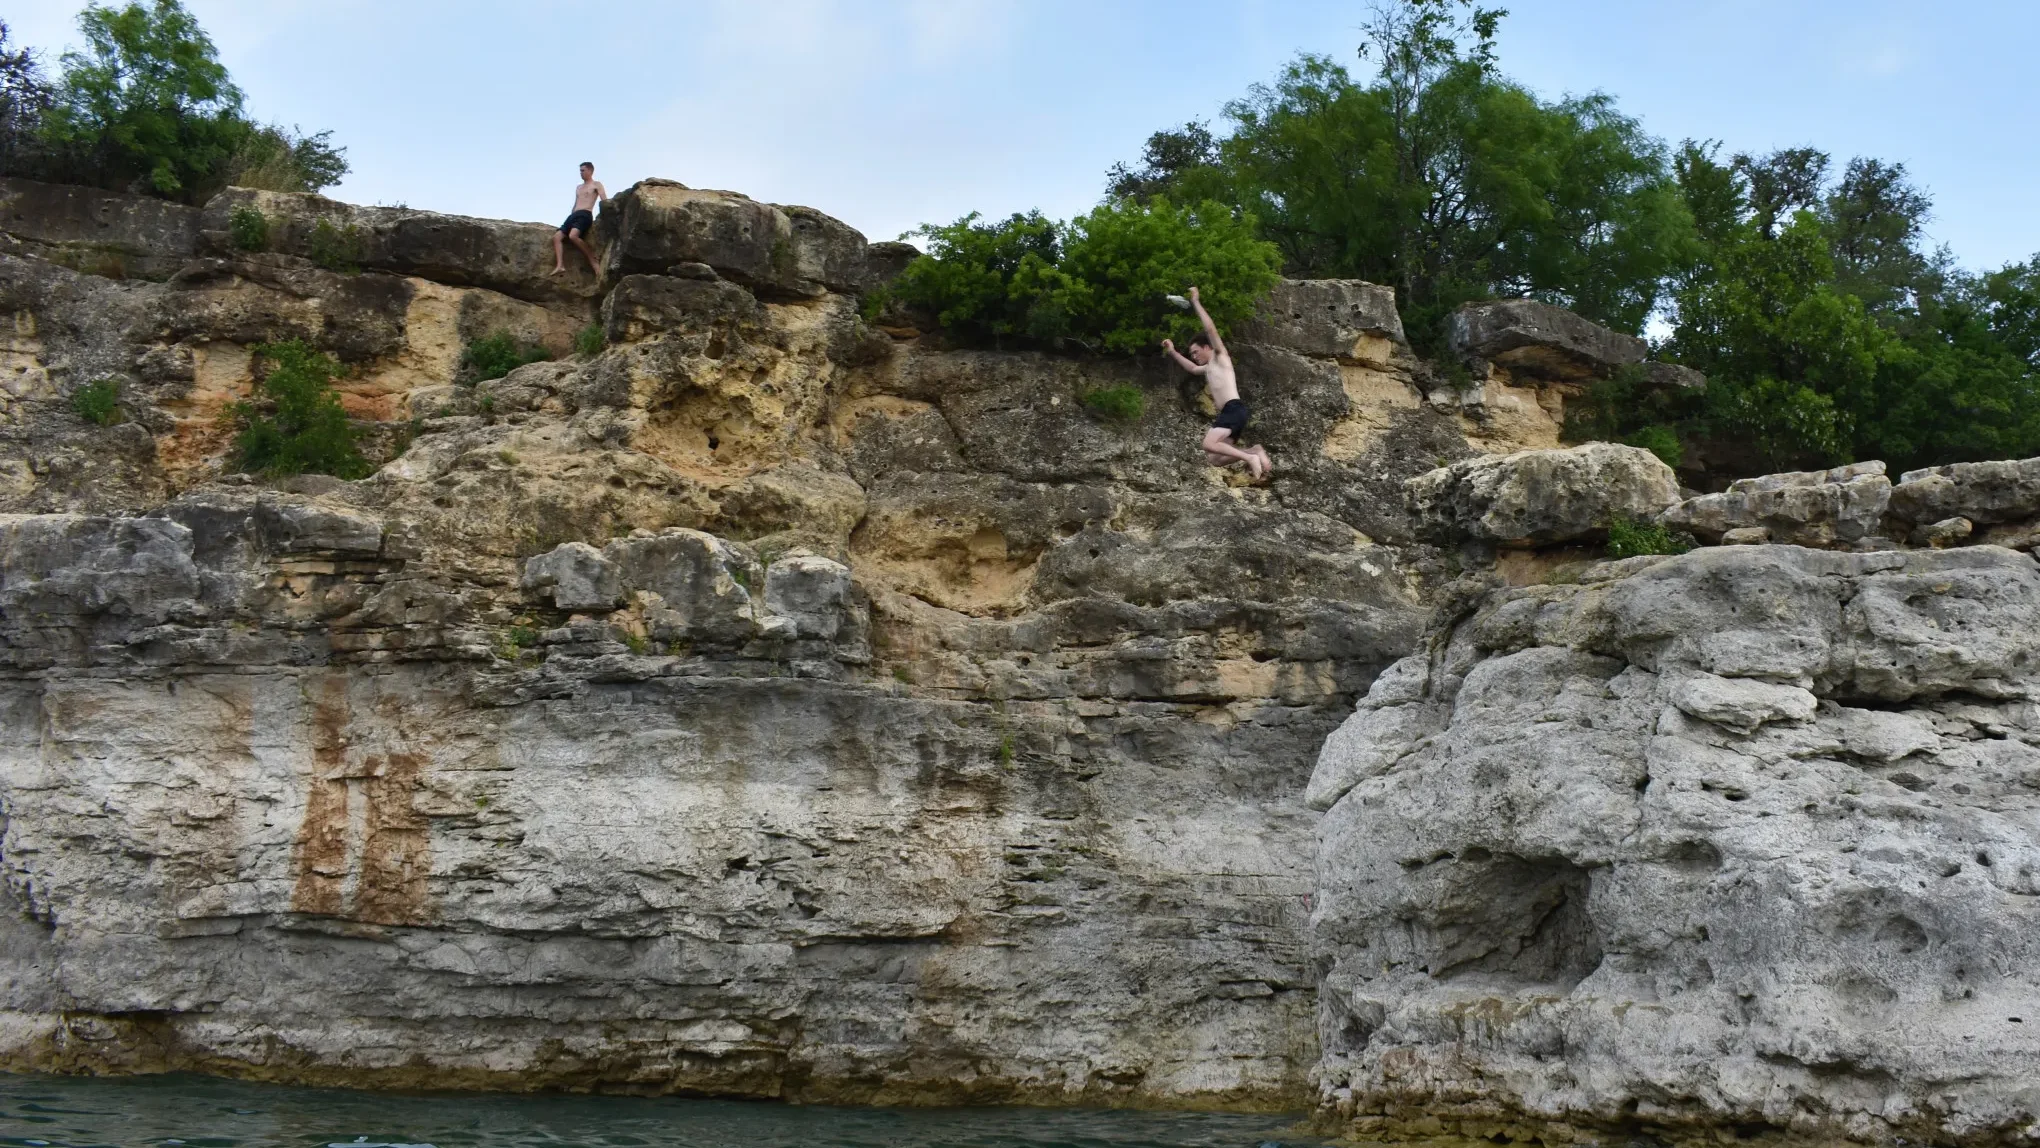 Pace Bend Park: Things to do at lake travis